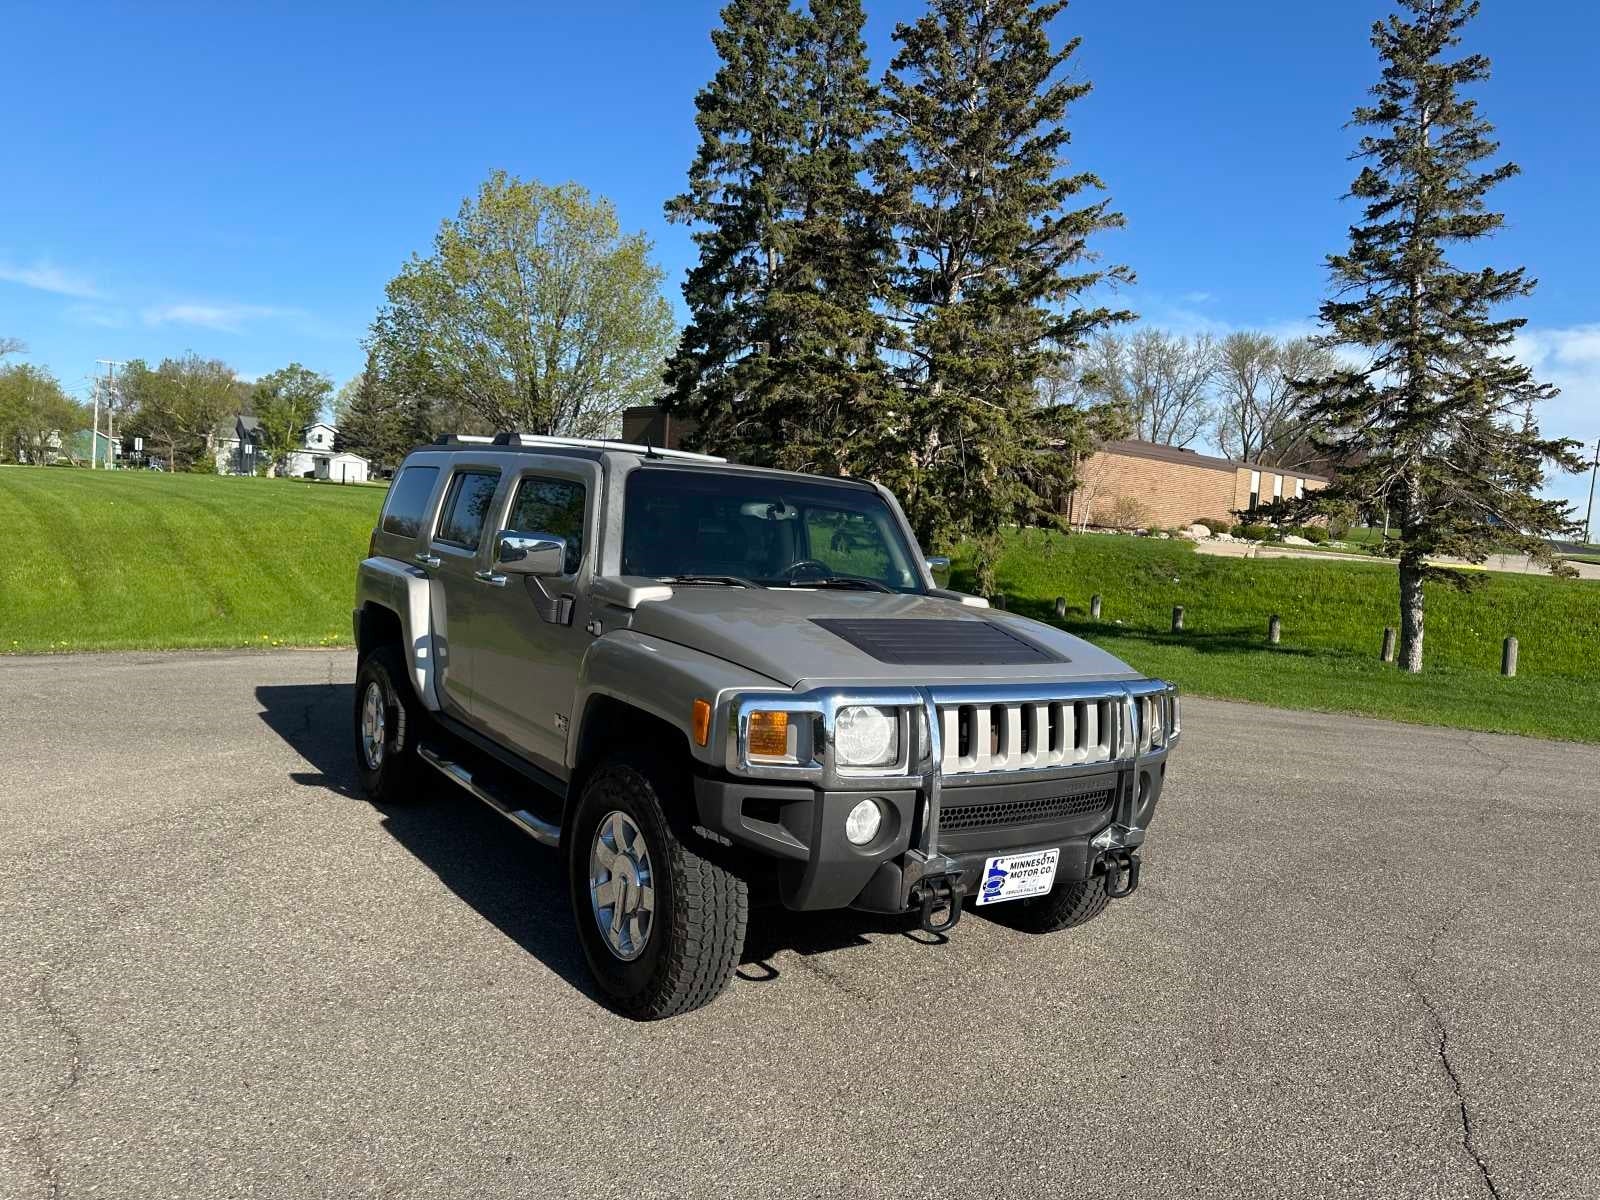 Used 2007 Hummer H3 H3 with VIN 5GTDN13E878135148 for sale in Fergus Falls, MN